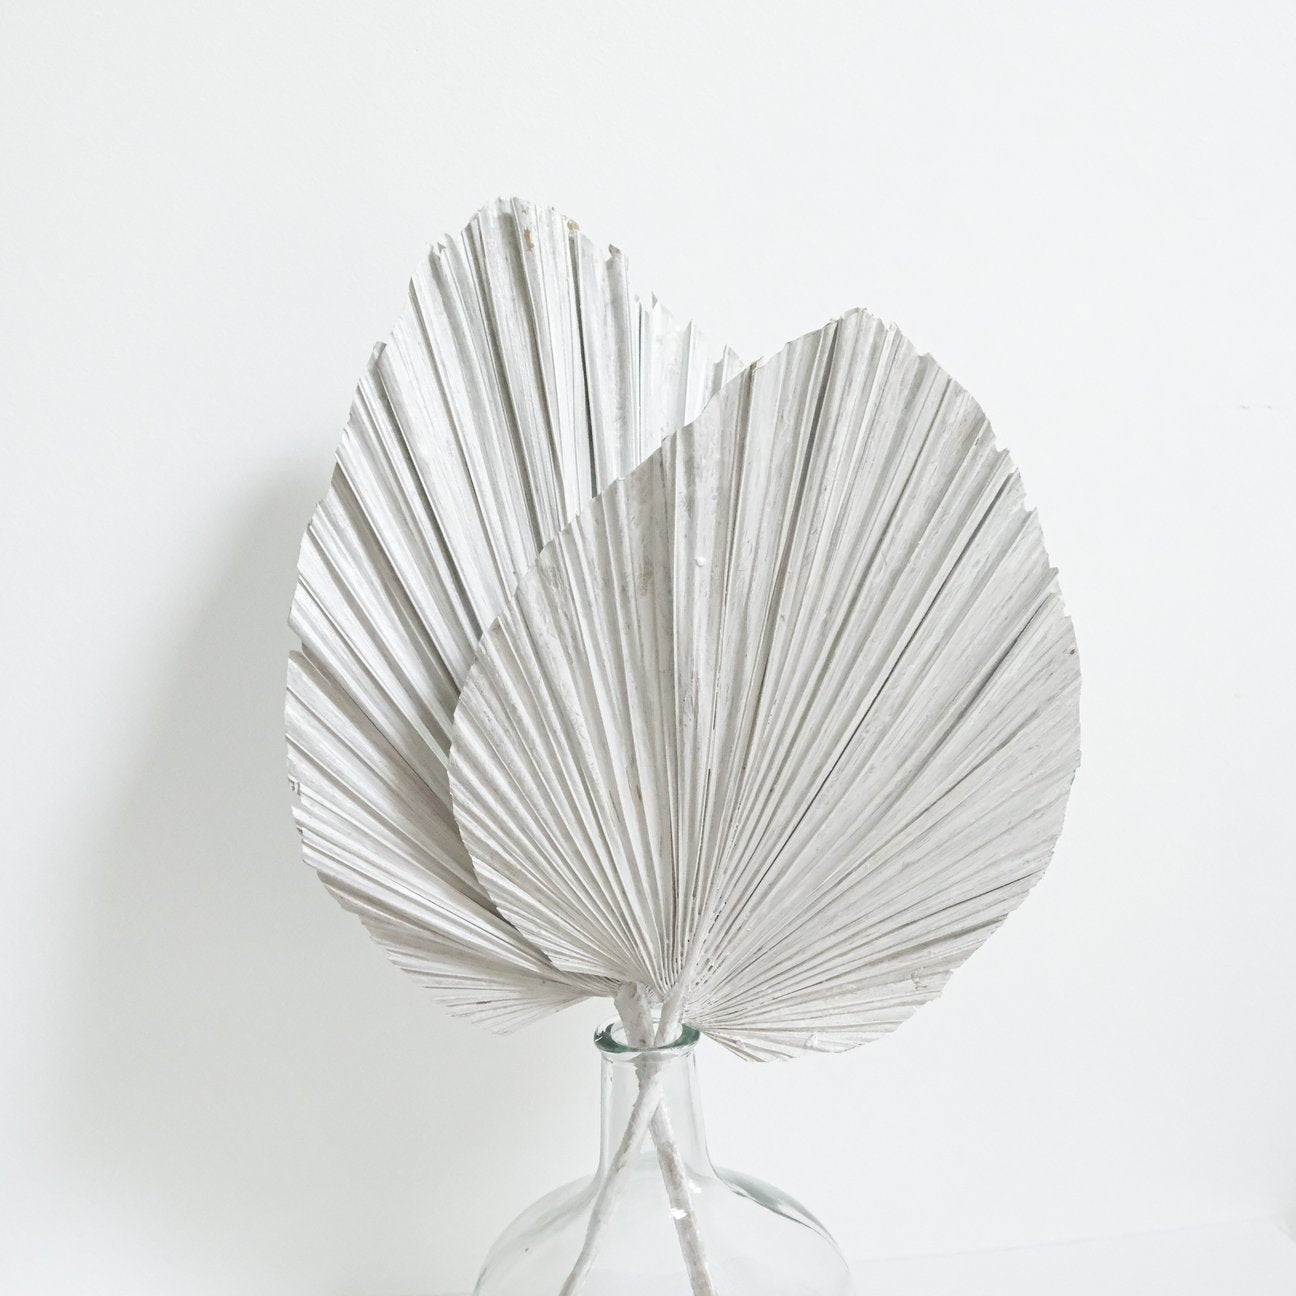 Large white spear palm available at Rook & Rose.